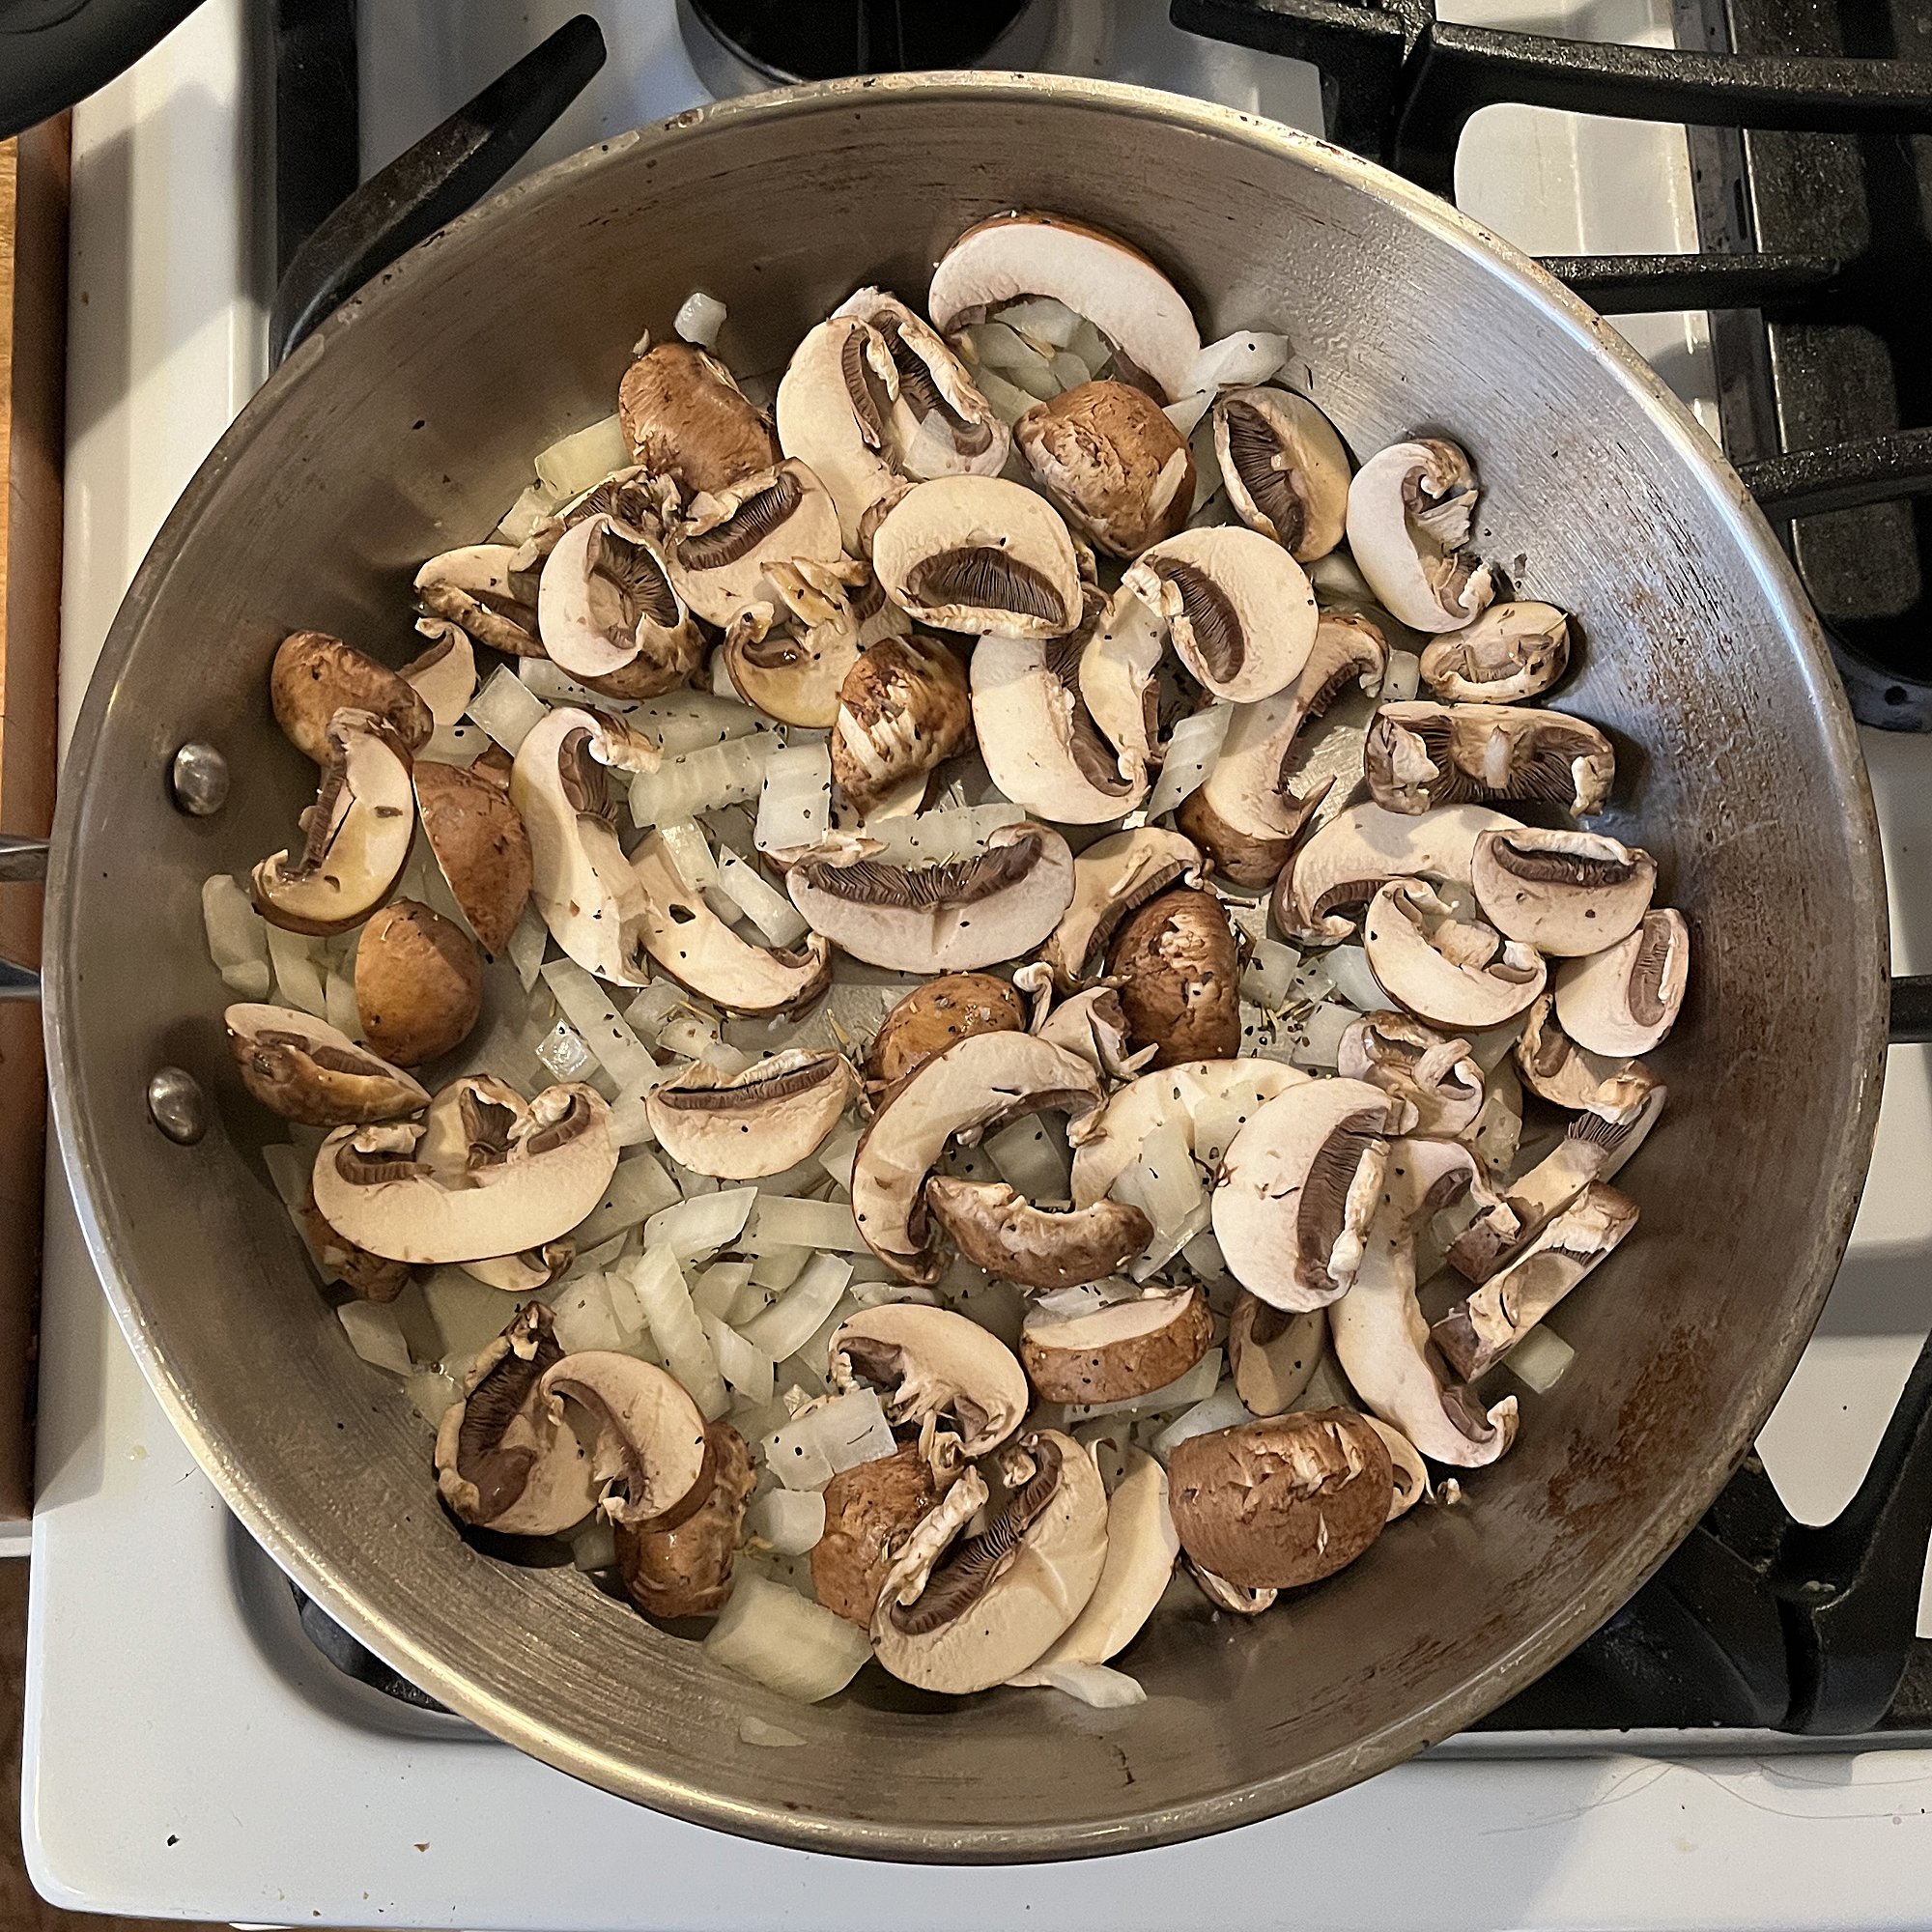 Meanwhile, sauté mushrooms, onions, and rosemary in olive oil.